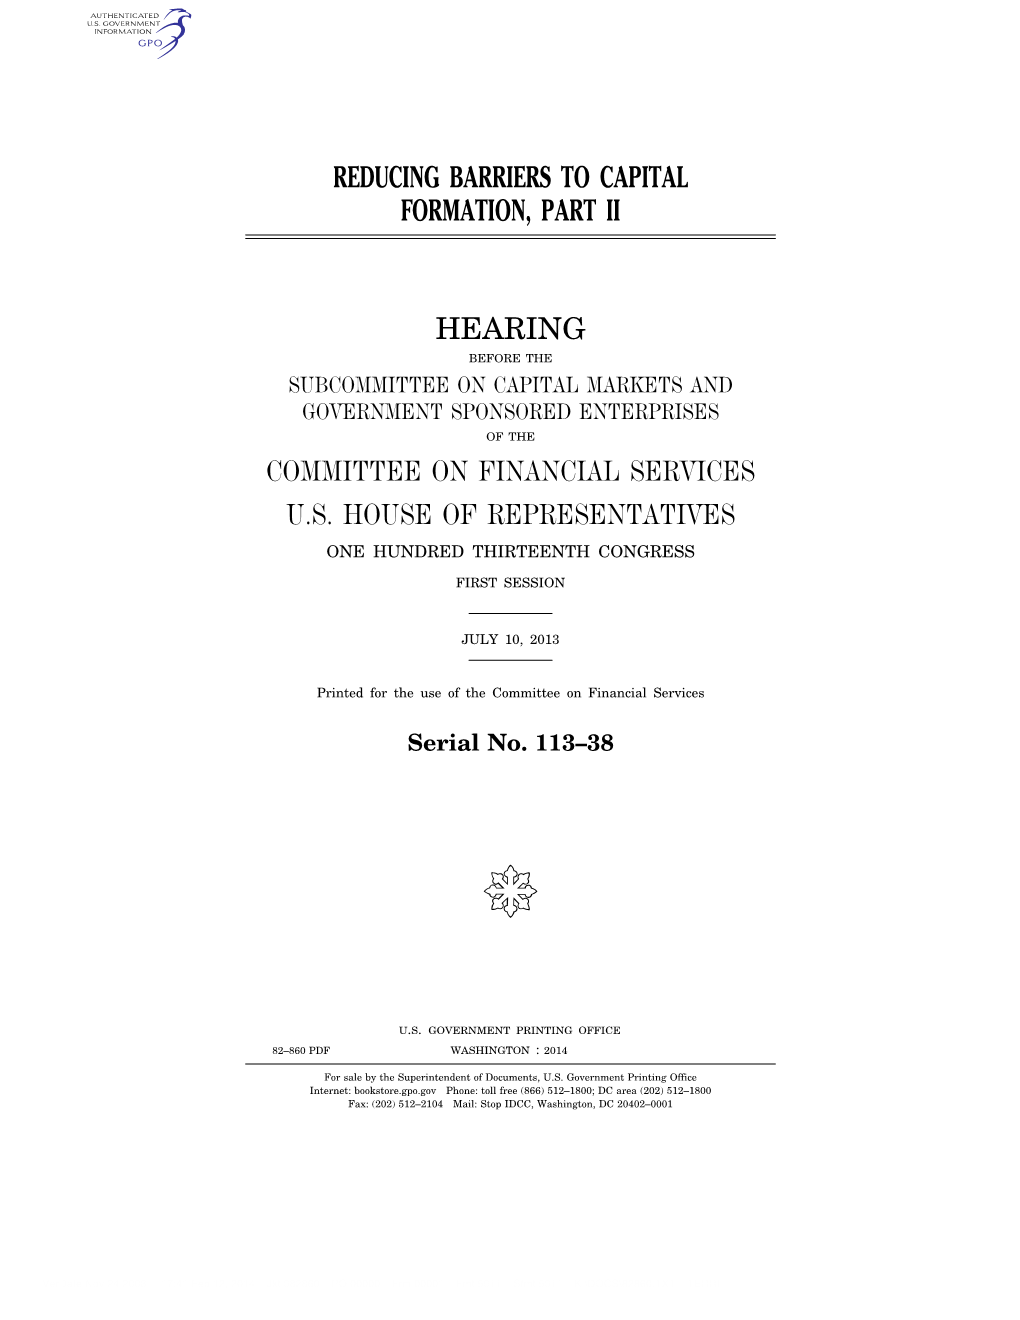 Reducing Barriers to Capital Formation, Part Ii